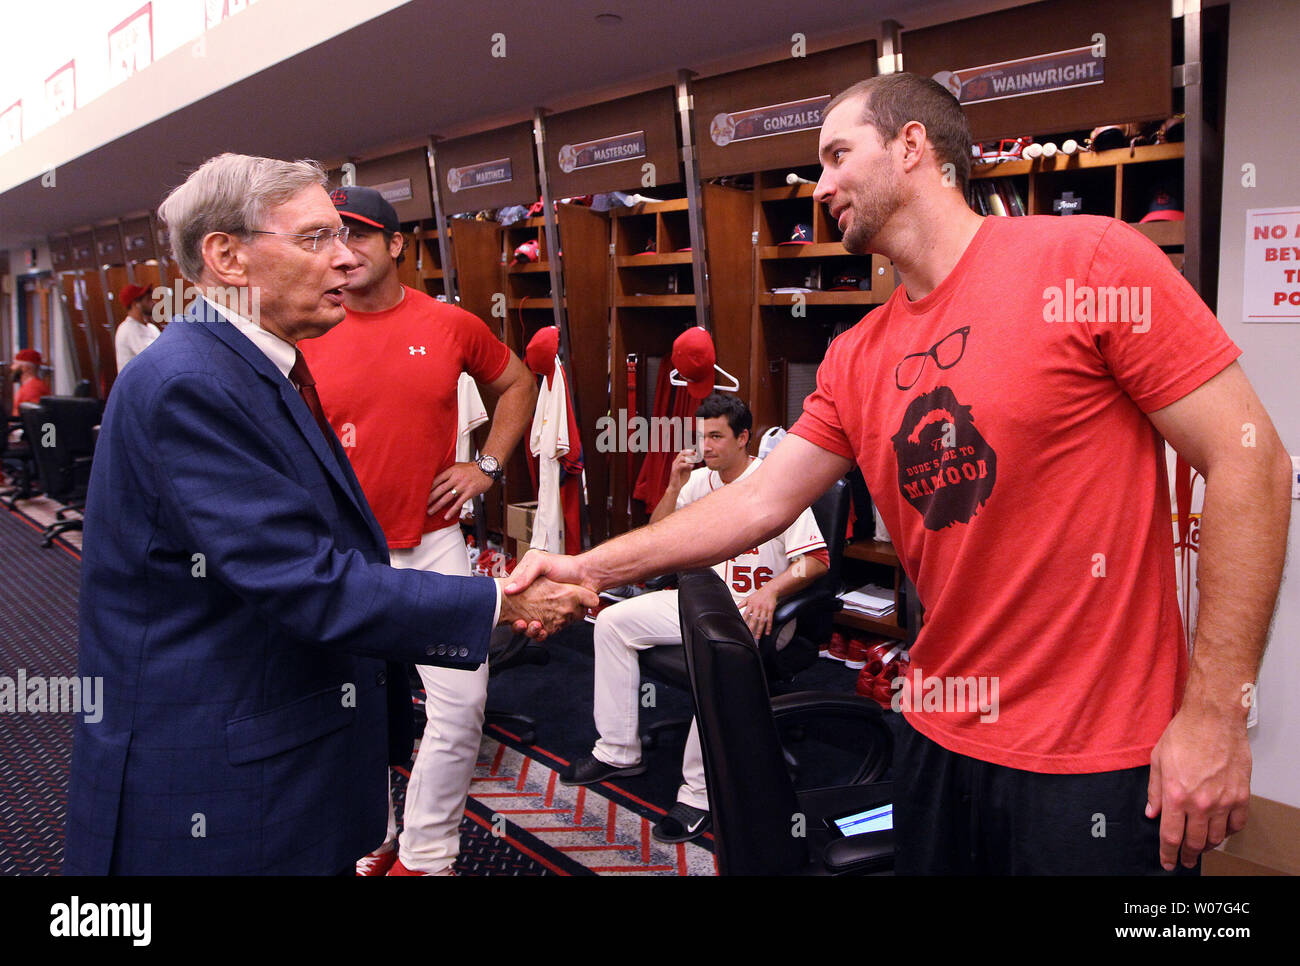 Major League Baseball Commissioner Bud Selig say hello to pitcher Adam  Wainwright during a visit to the St. Louis Cardinals locker room at Busch  Stadium in St. Louis on September 20, 2014.